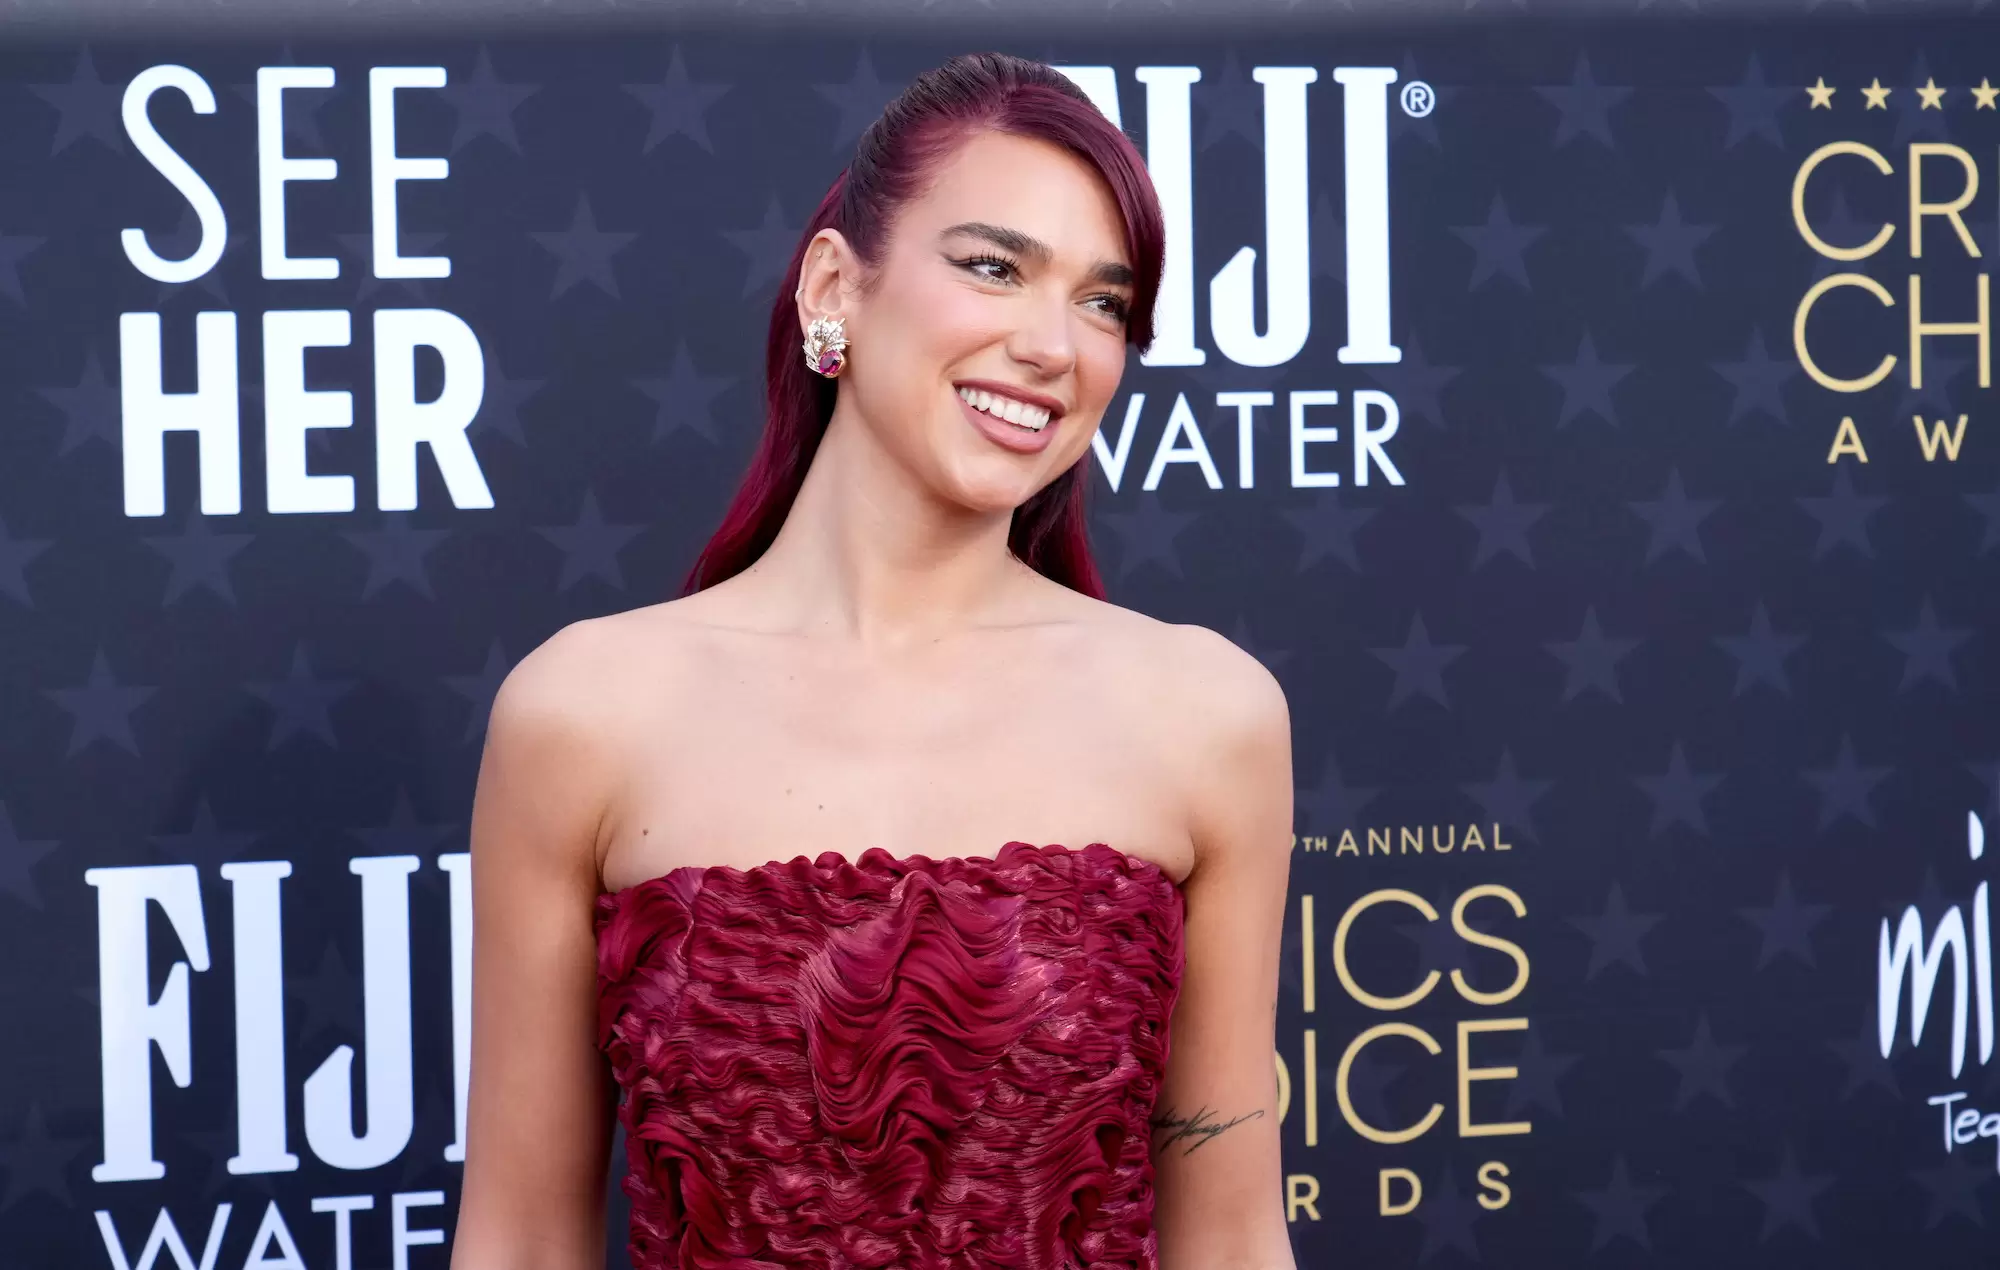 Dua Lipa calls for Israel Gaza ceasefire and for world leaders to “take a stand”